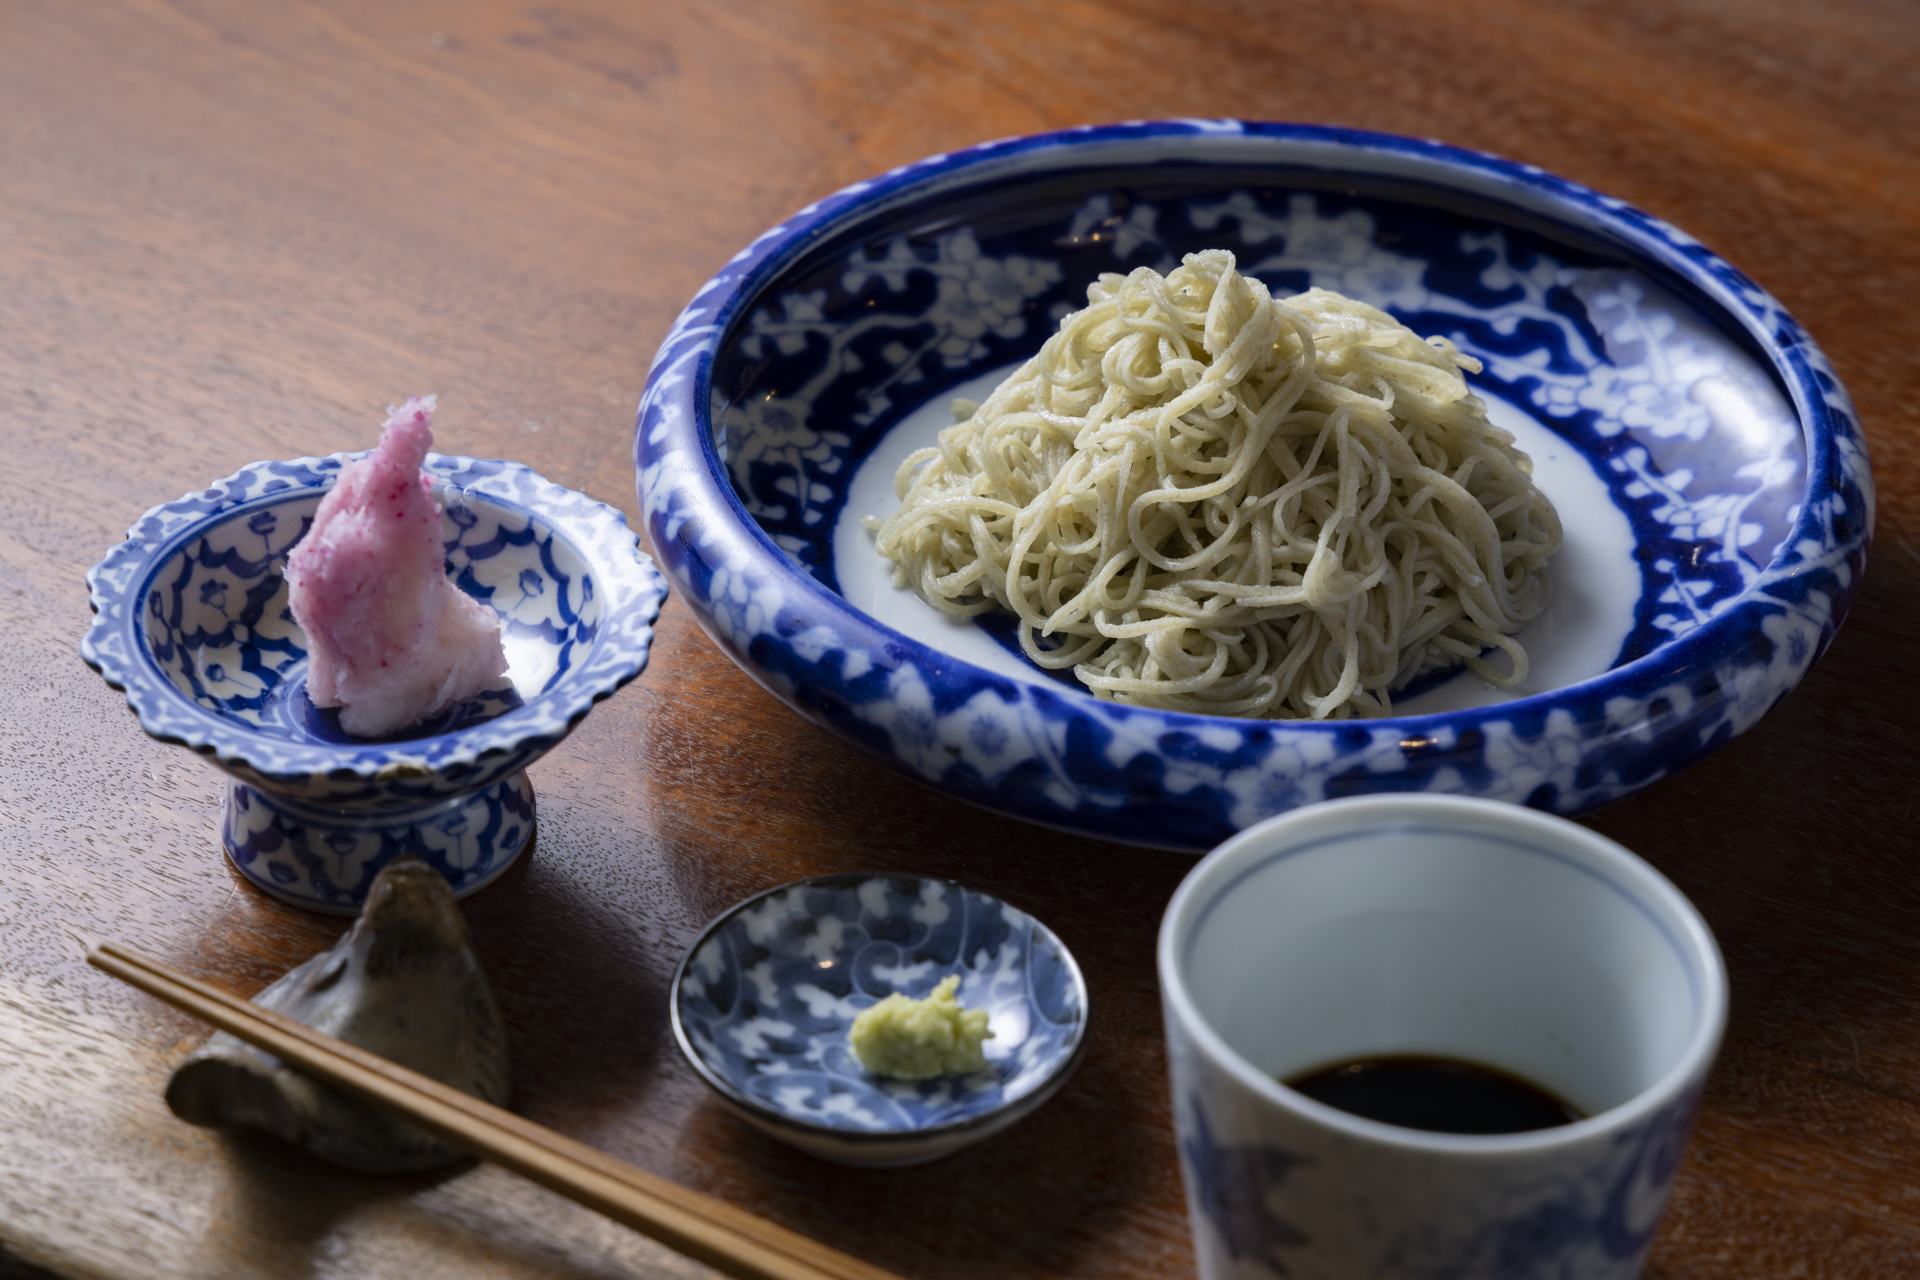 Delicious soba set made with local ingredients. The noodles are delicate, yet filling. 